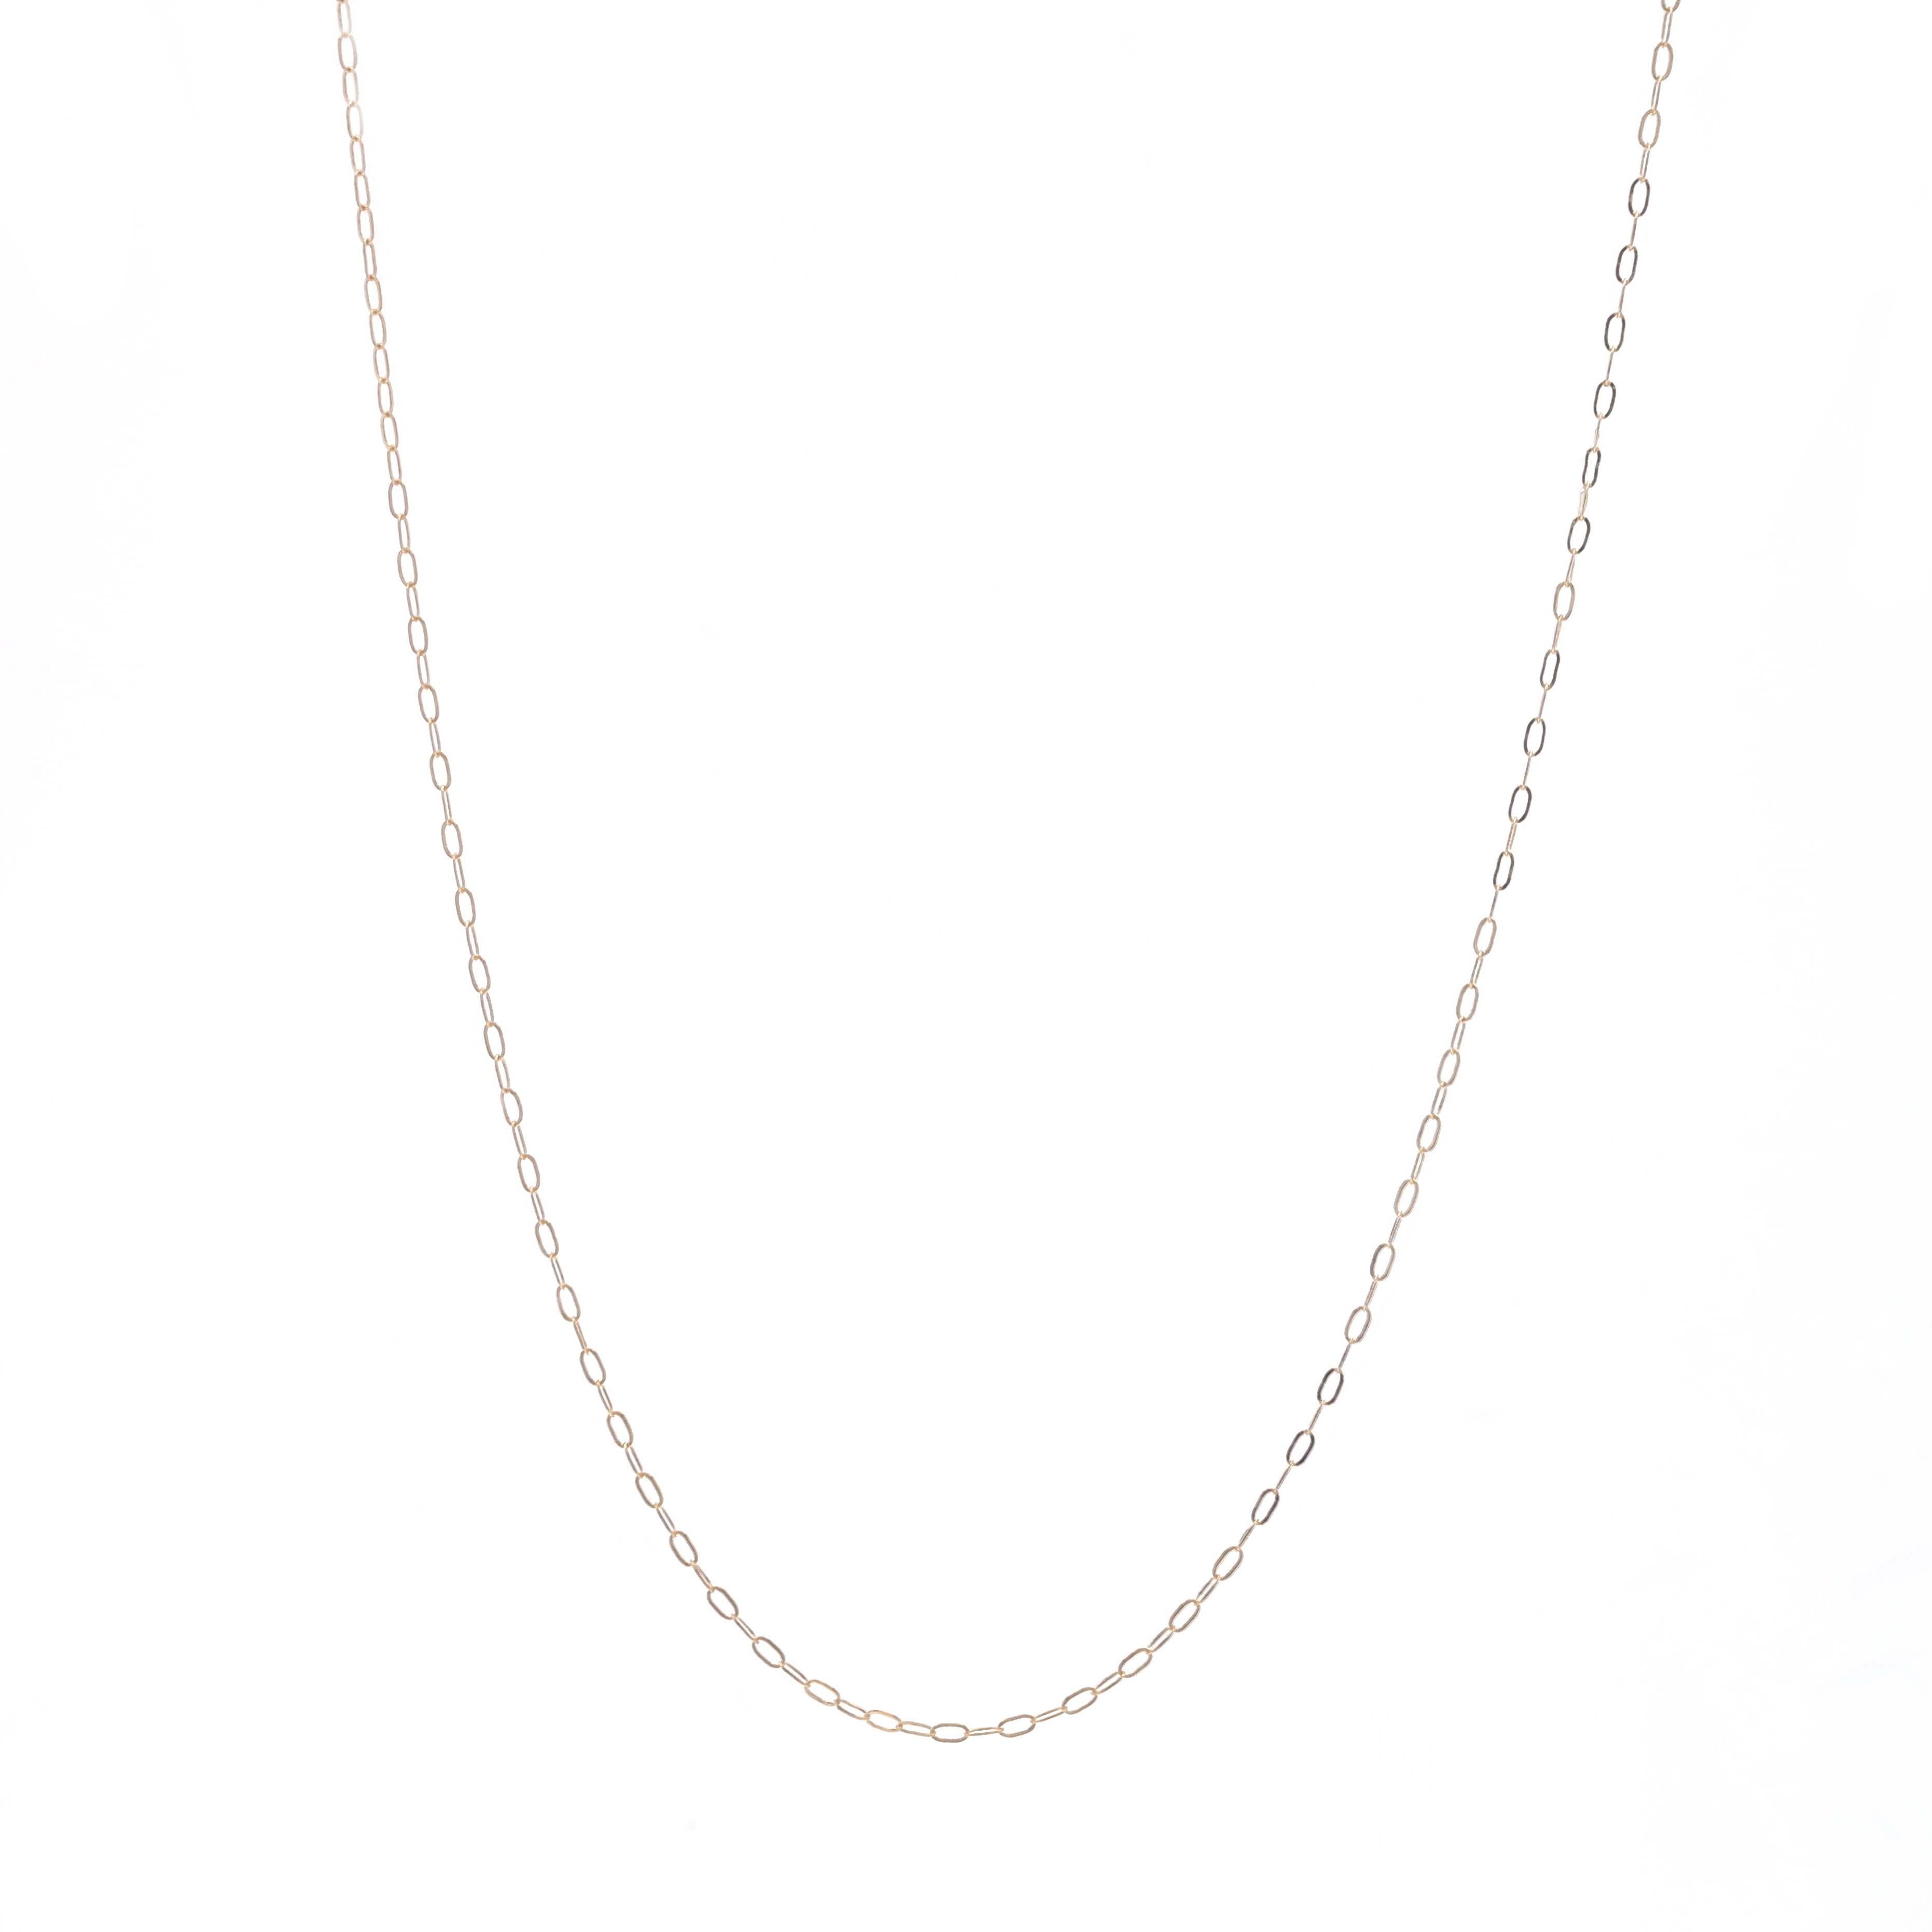 Metal Content: 14k Yellow Gold

Chain Style: Flat Cable
Necklace Style: Chain
Fastening Type: Spring Ring Clasp

Measurements

Length: 18